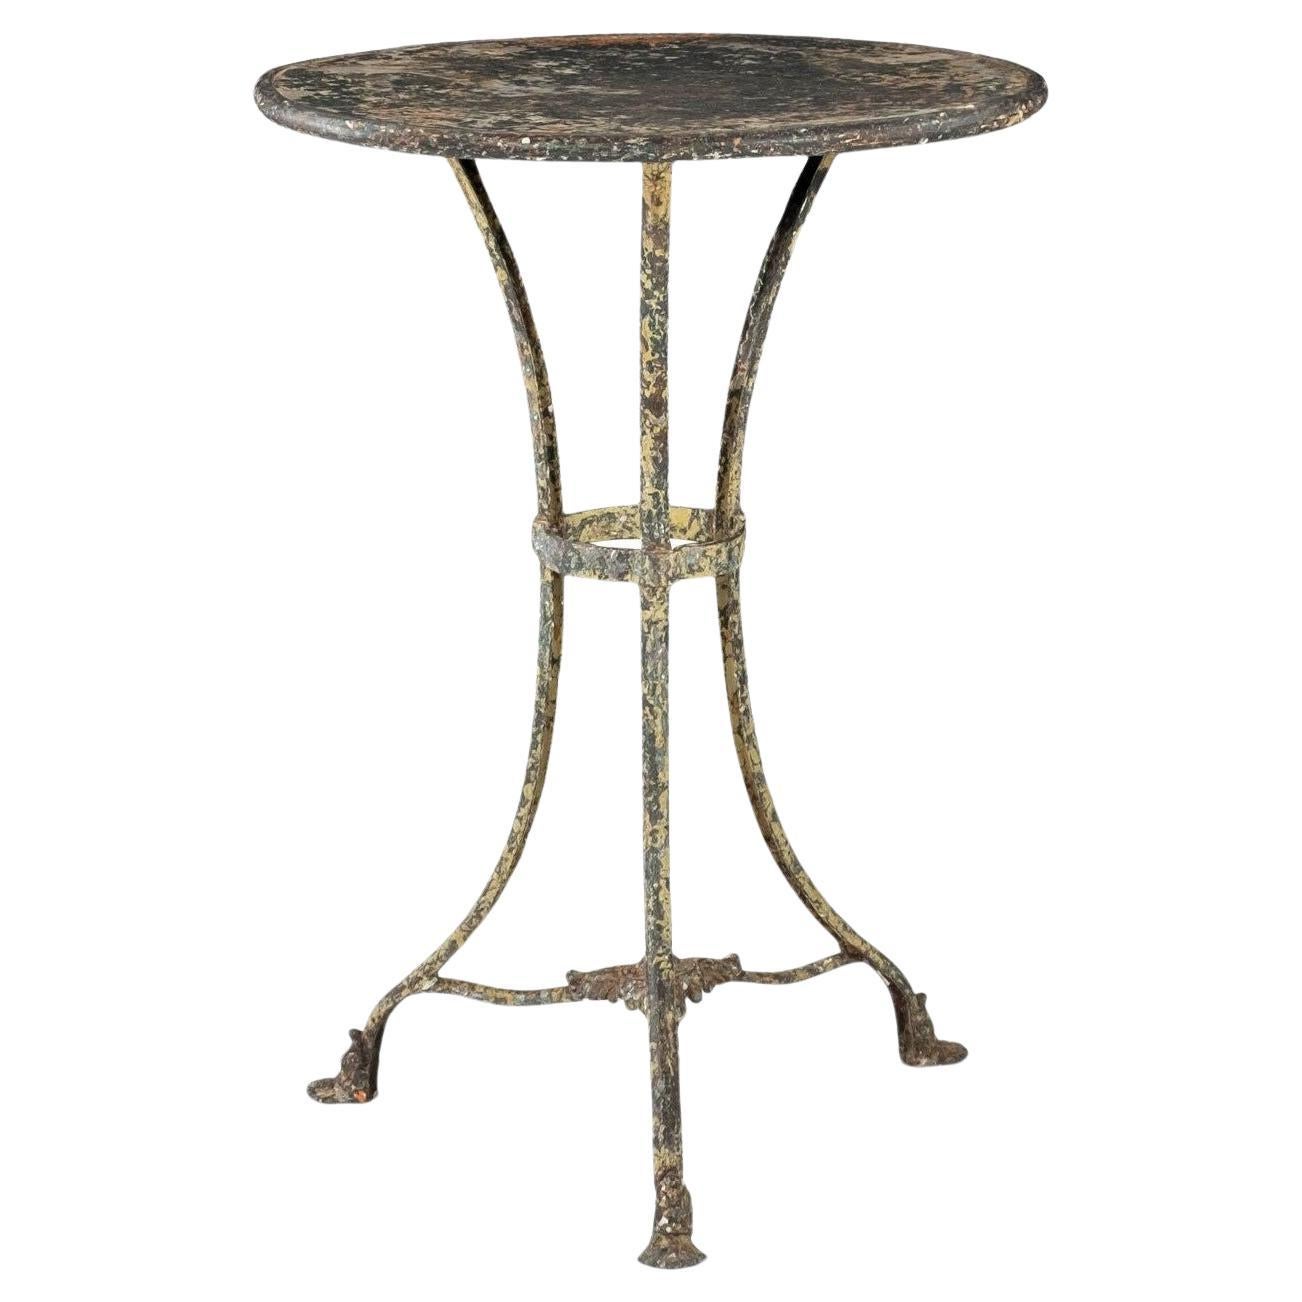 Arras Painted Iron Garden Table For Sale